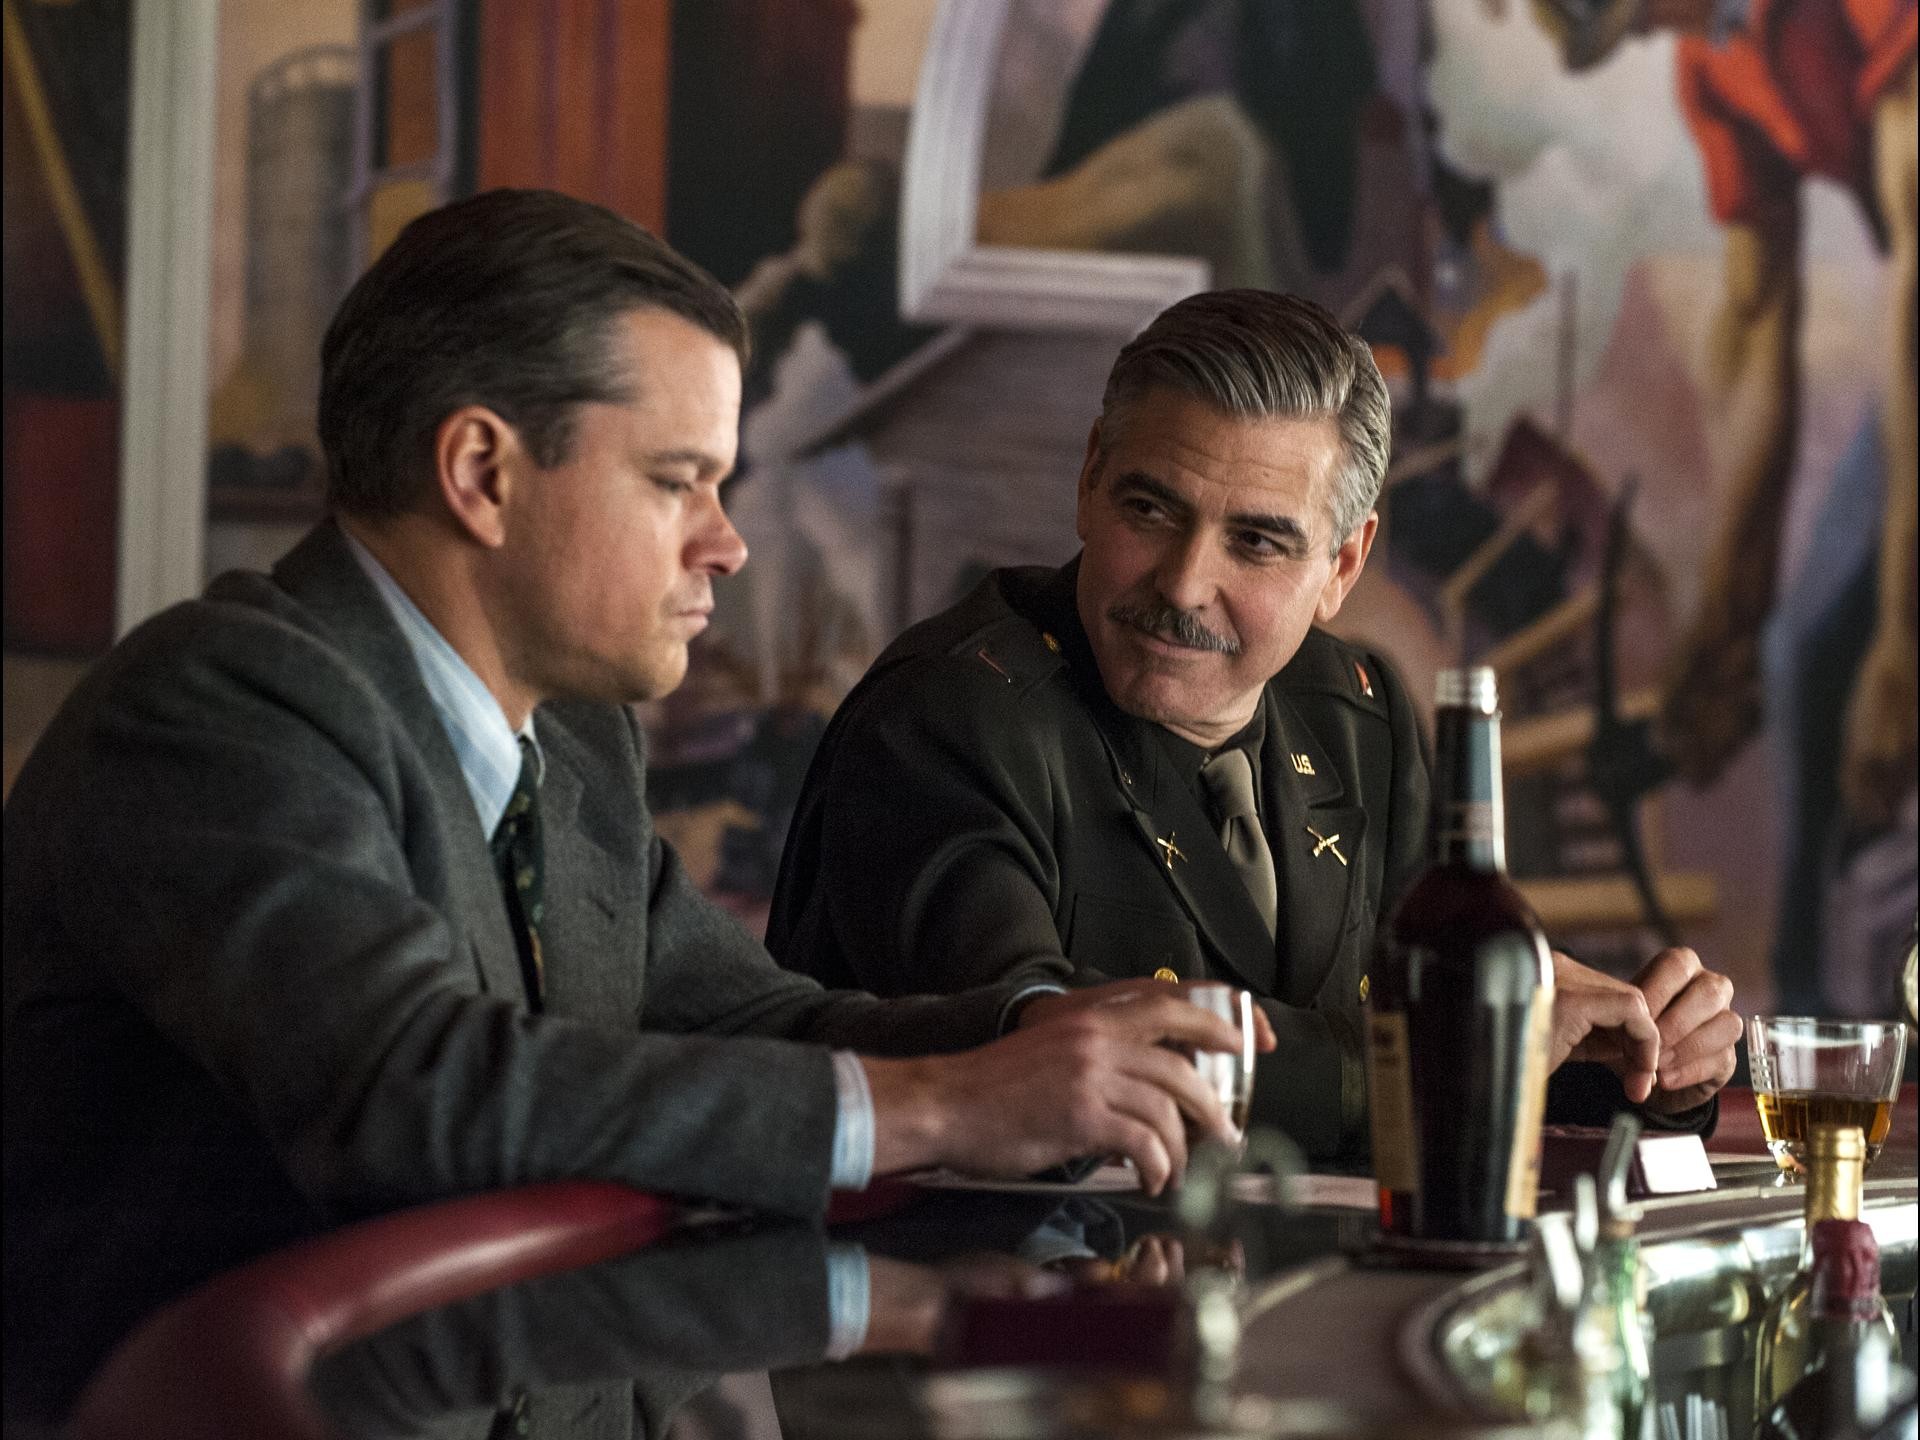 Matt Damon stars as James Granger and George Clooney stars as Frank Stokes in Columbia Pictures' The Monuments Men (2014). Photo credit by Claudette Barius.